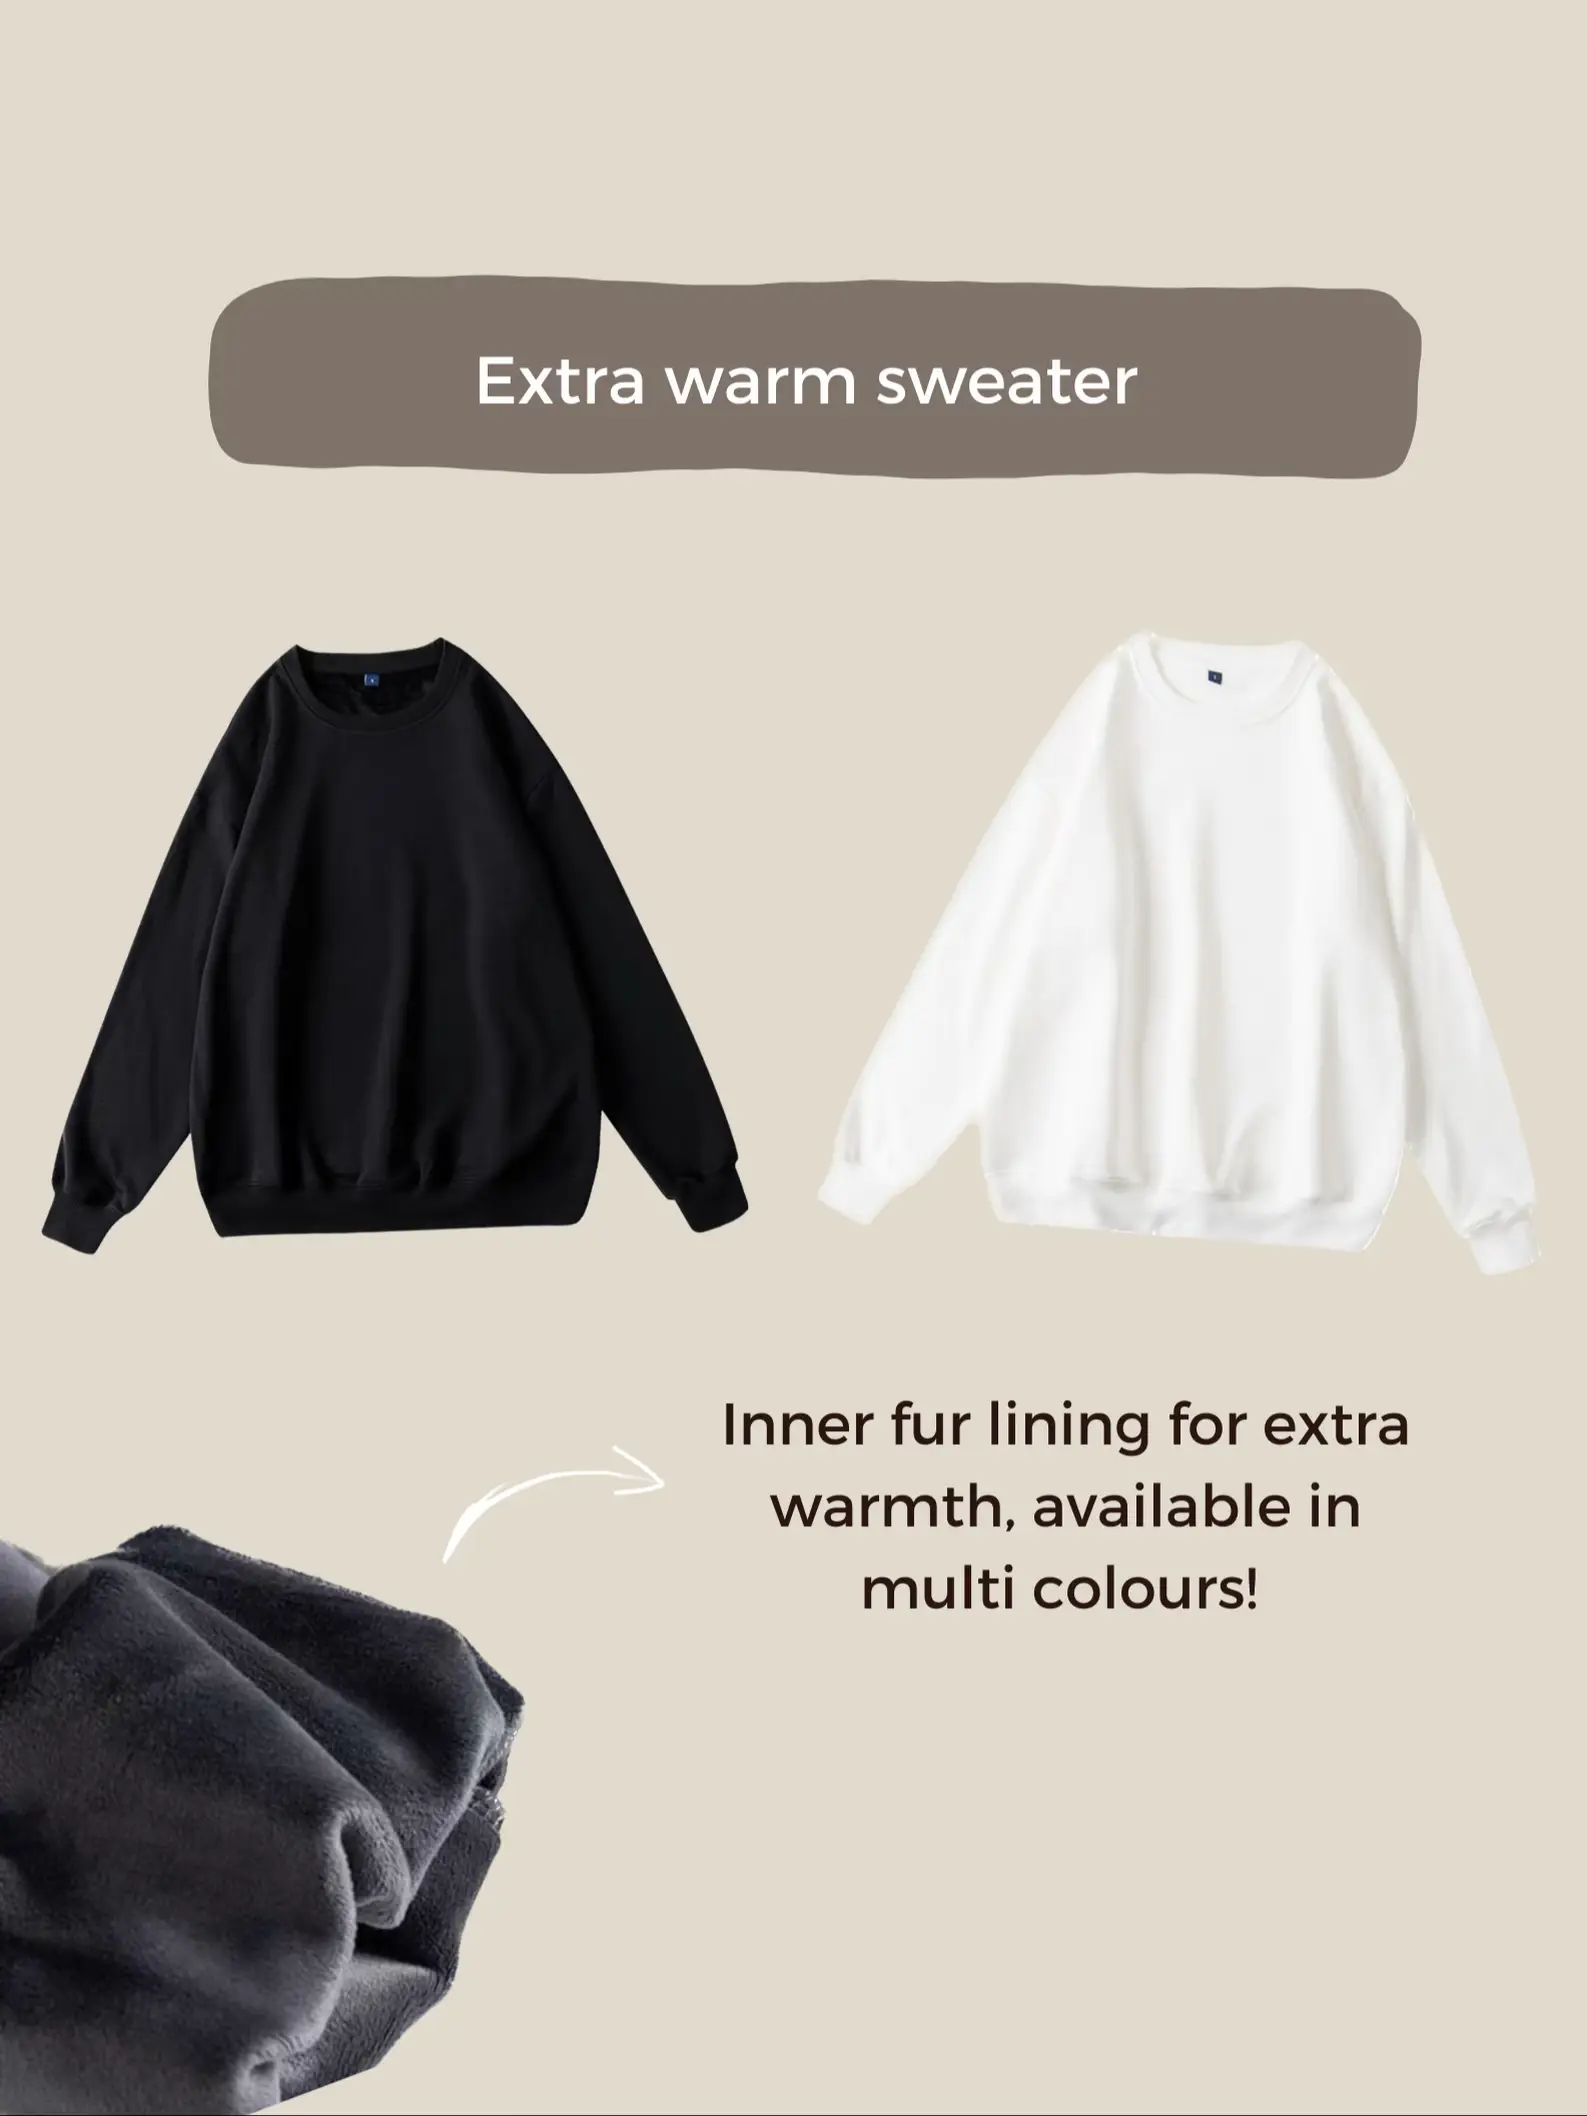 4 Essentials from Taobao for your Winter Holiday ❄️, Gallery posted by  momorie 💭